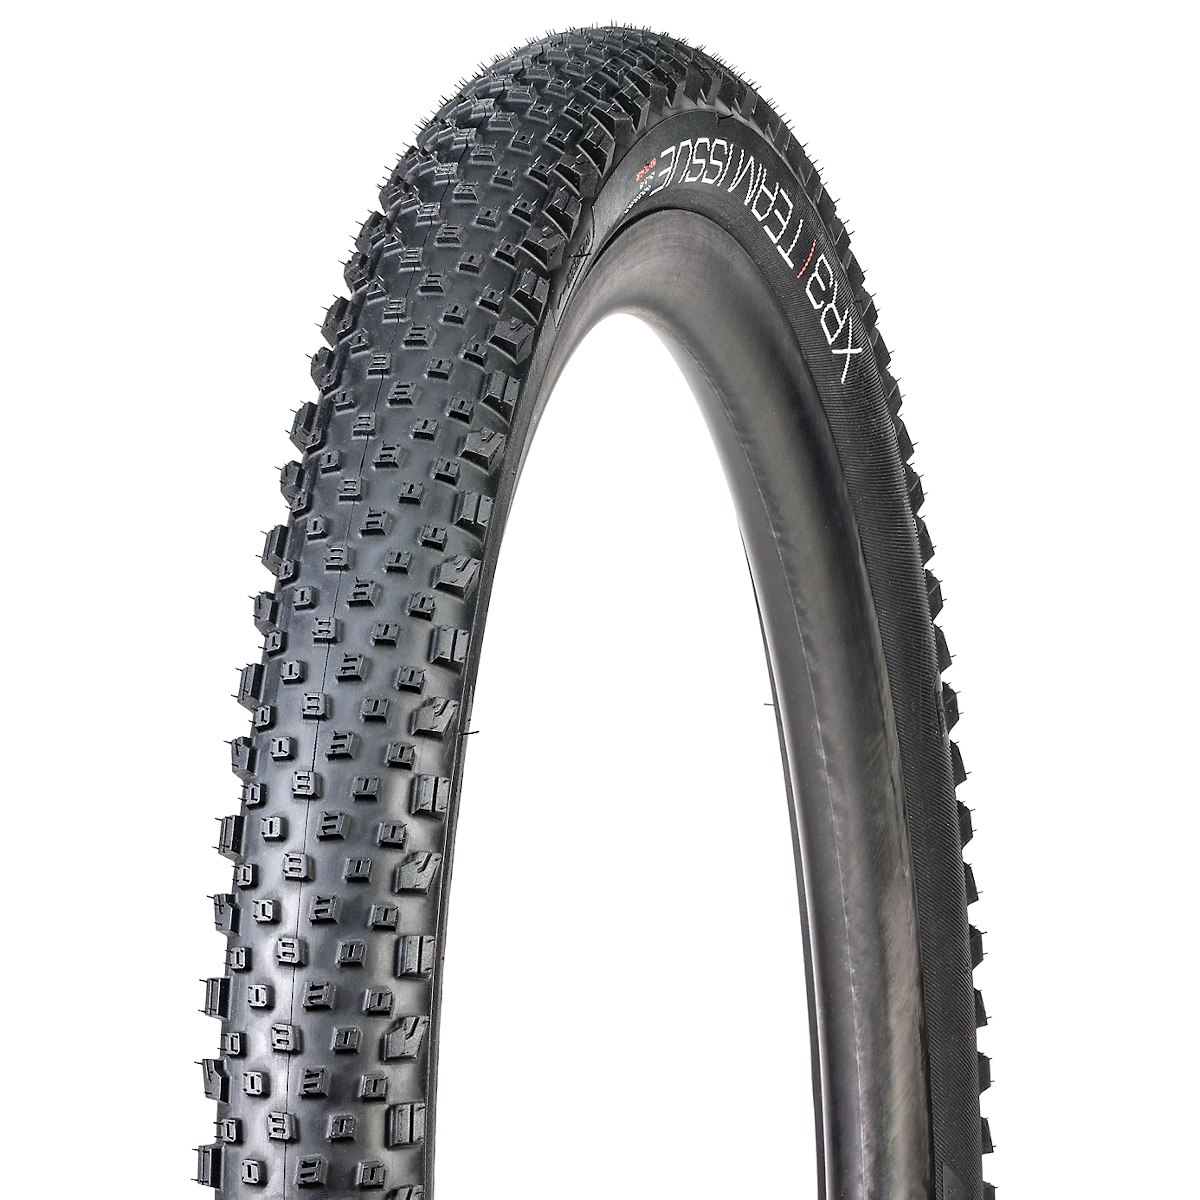 Picture of Bontrager XR3 Team Issue TLR MTB Folding Tire 27.5x2.8 Inches